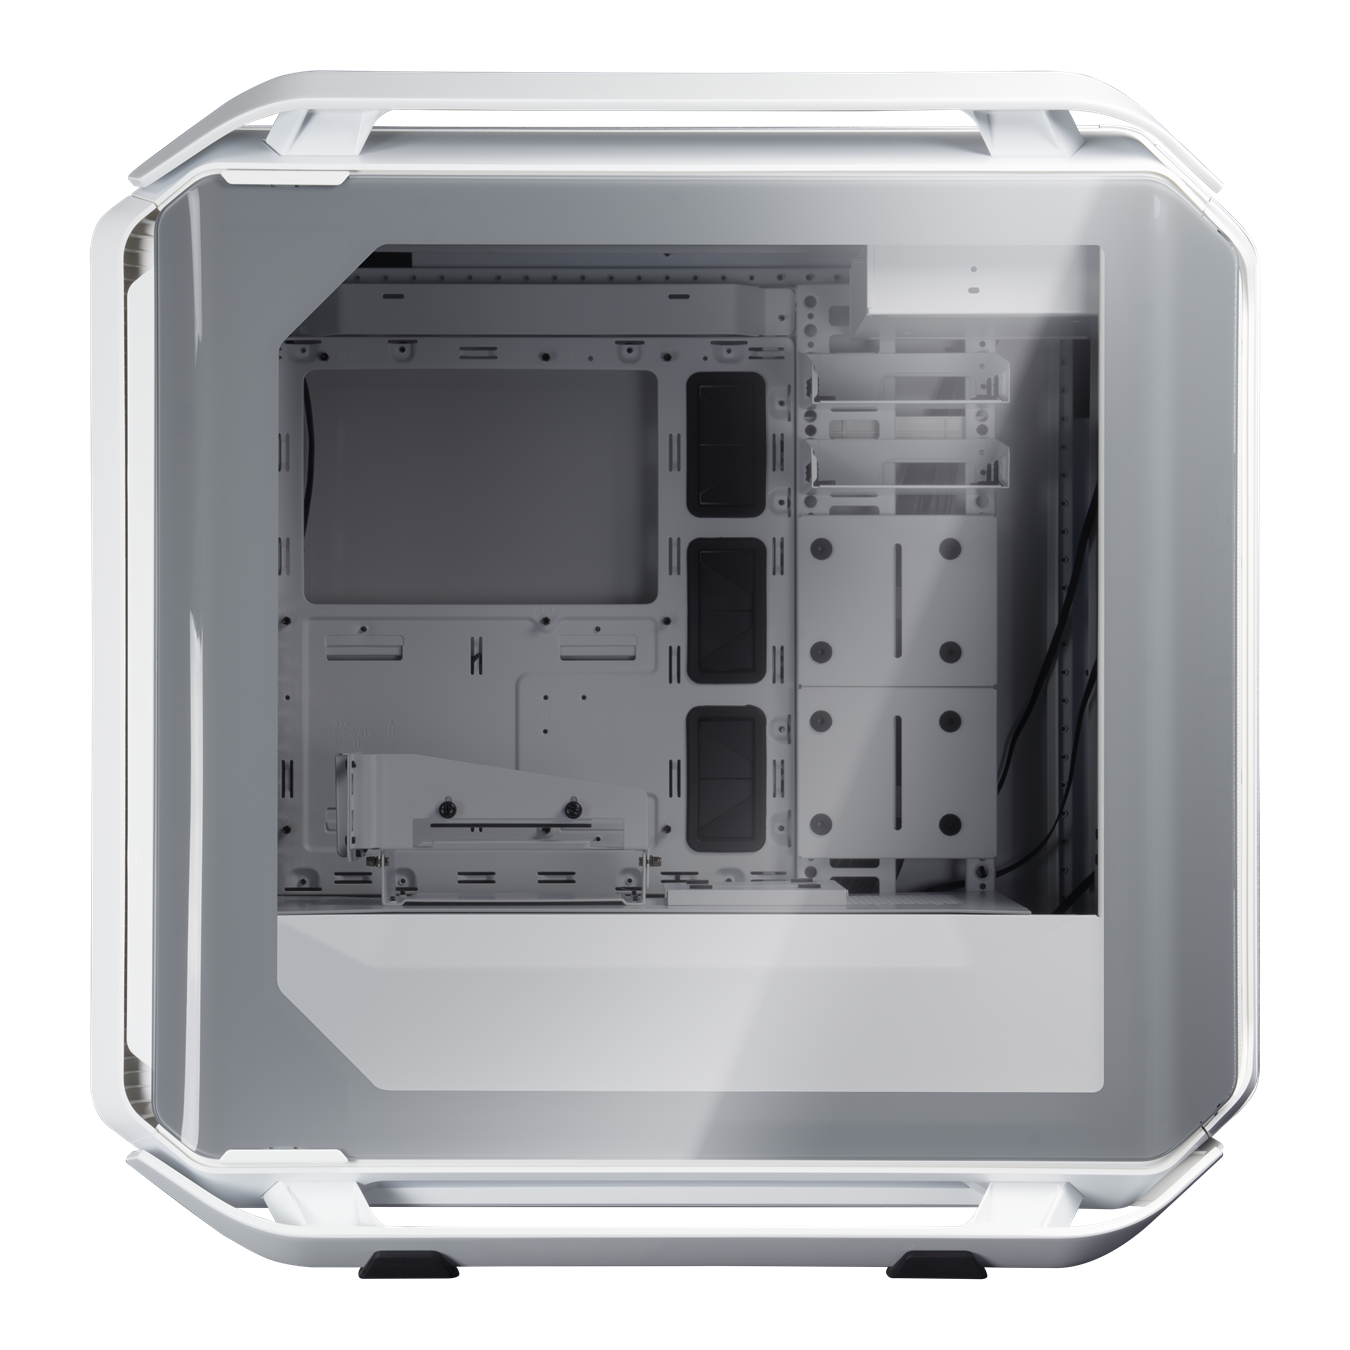 COOLER MASTER COSMOS C700M STEEL TEMPERED GLASS CASING-SILVER &amp; WHITE